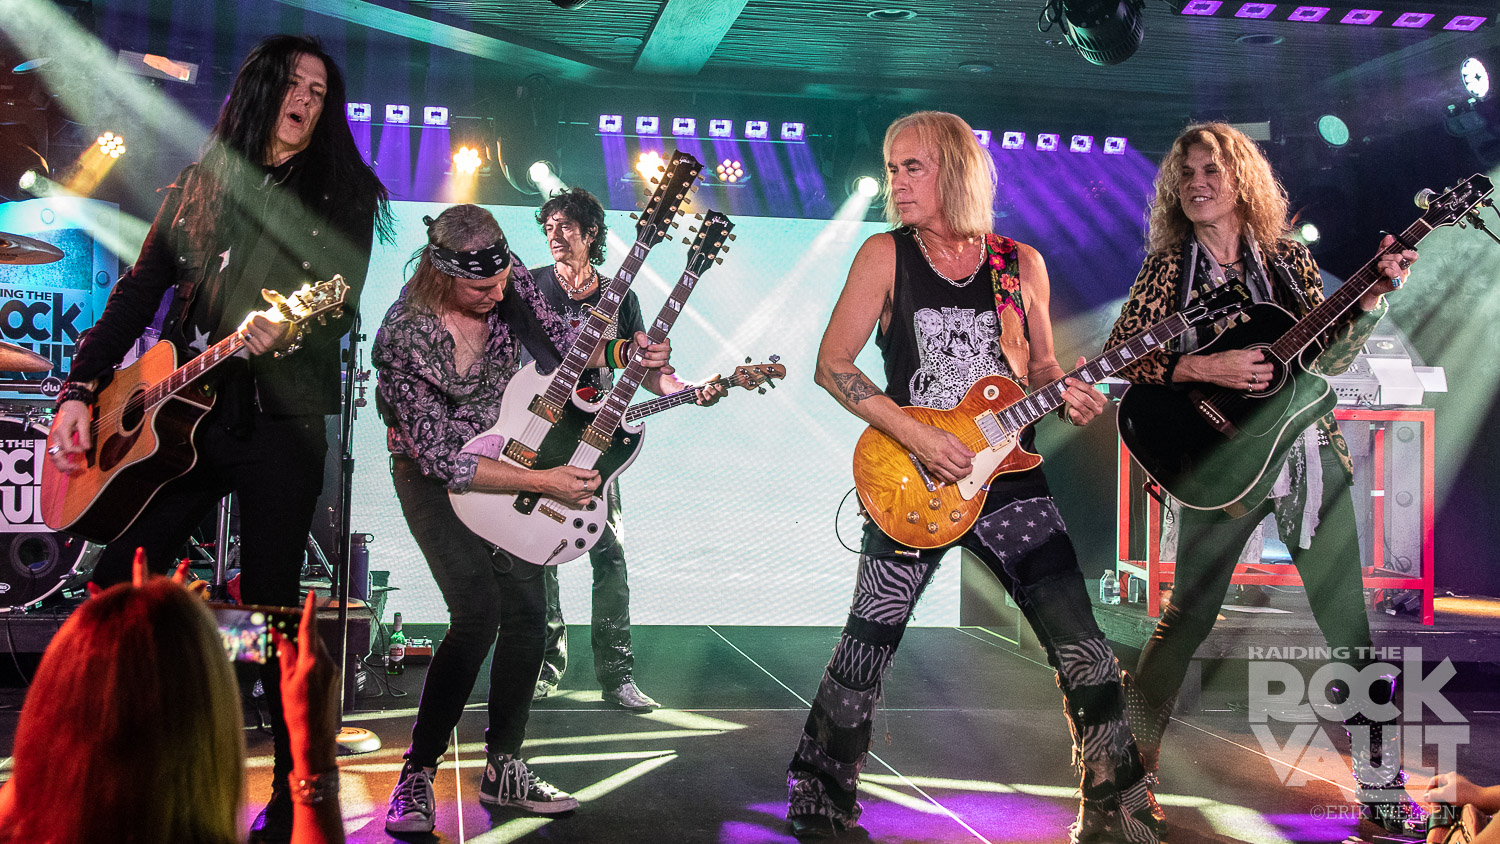 RAIDING THE ROCK VAULT 2023 TICKETS NOW ON SALE AT THE RIO ALL-SUITE HOTEL & CASINO